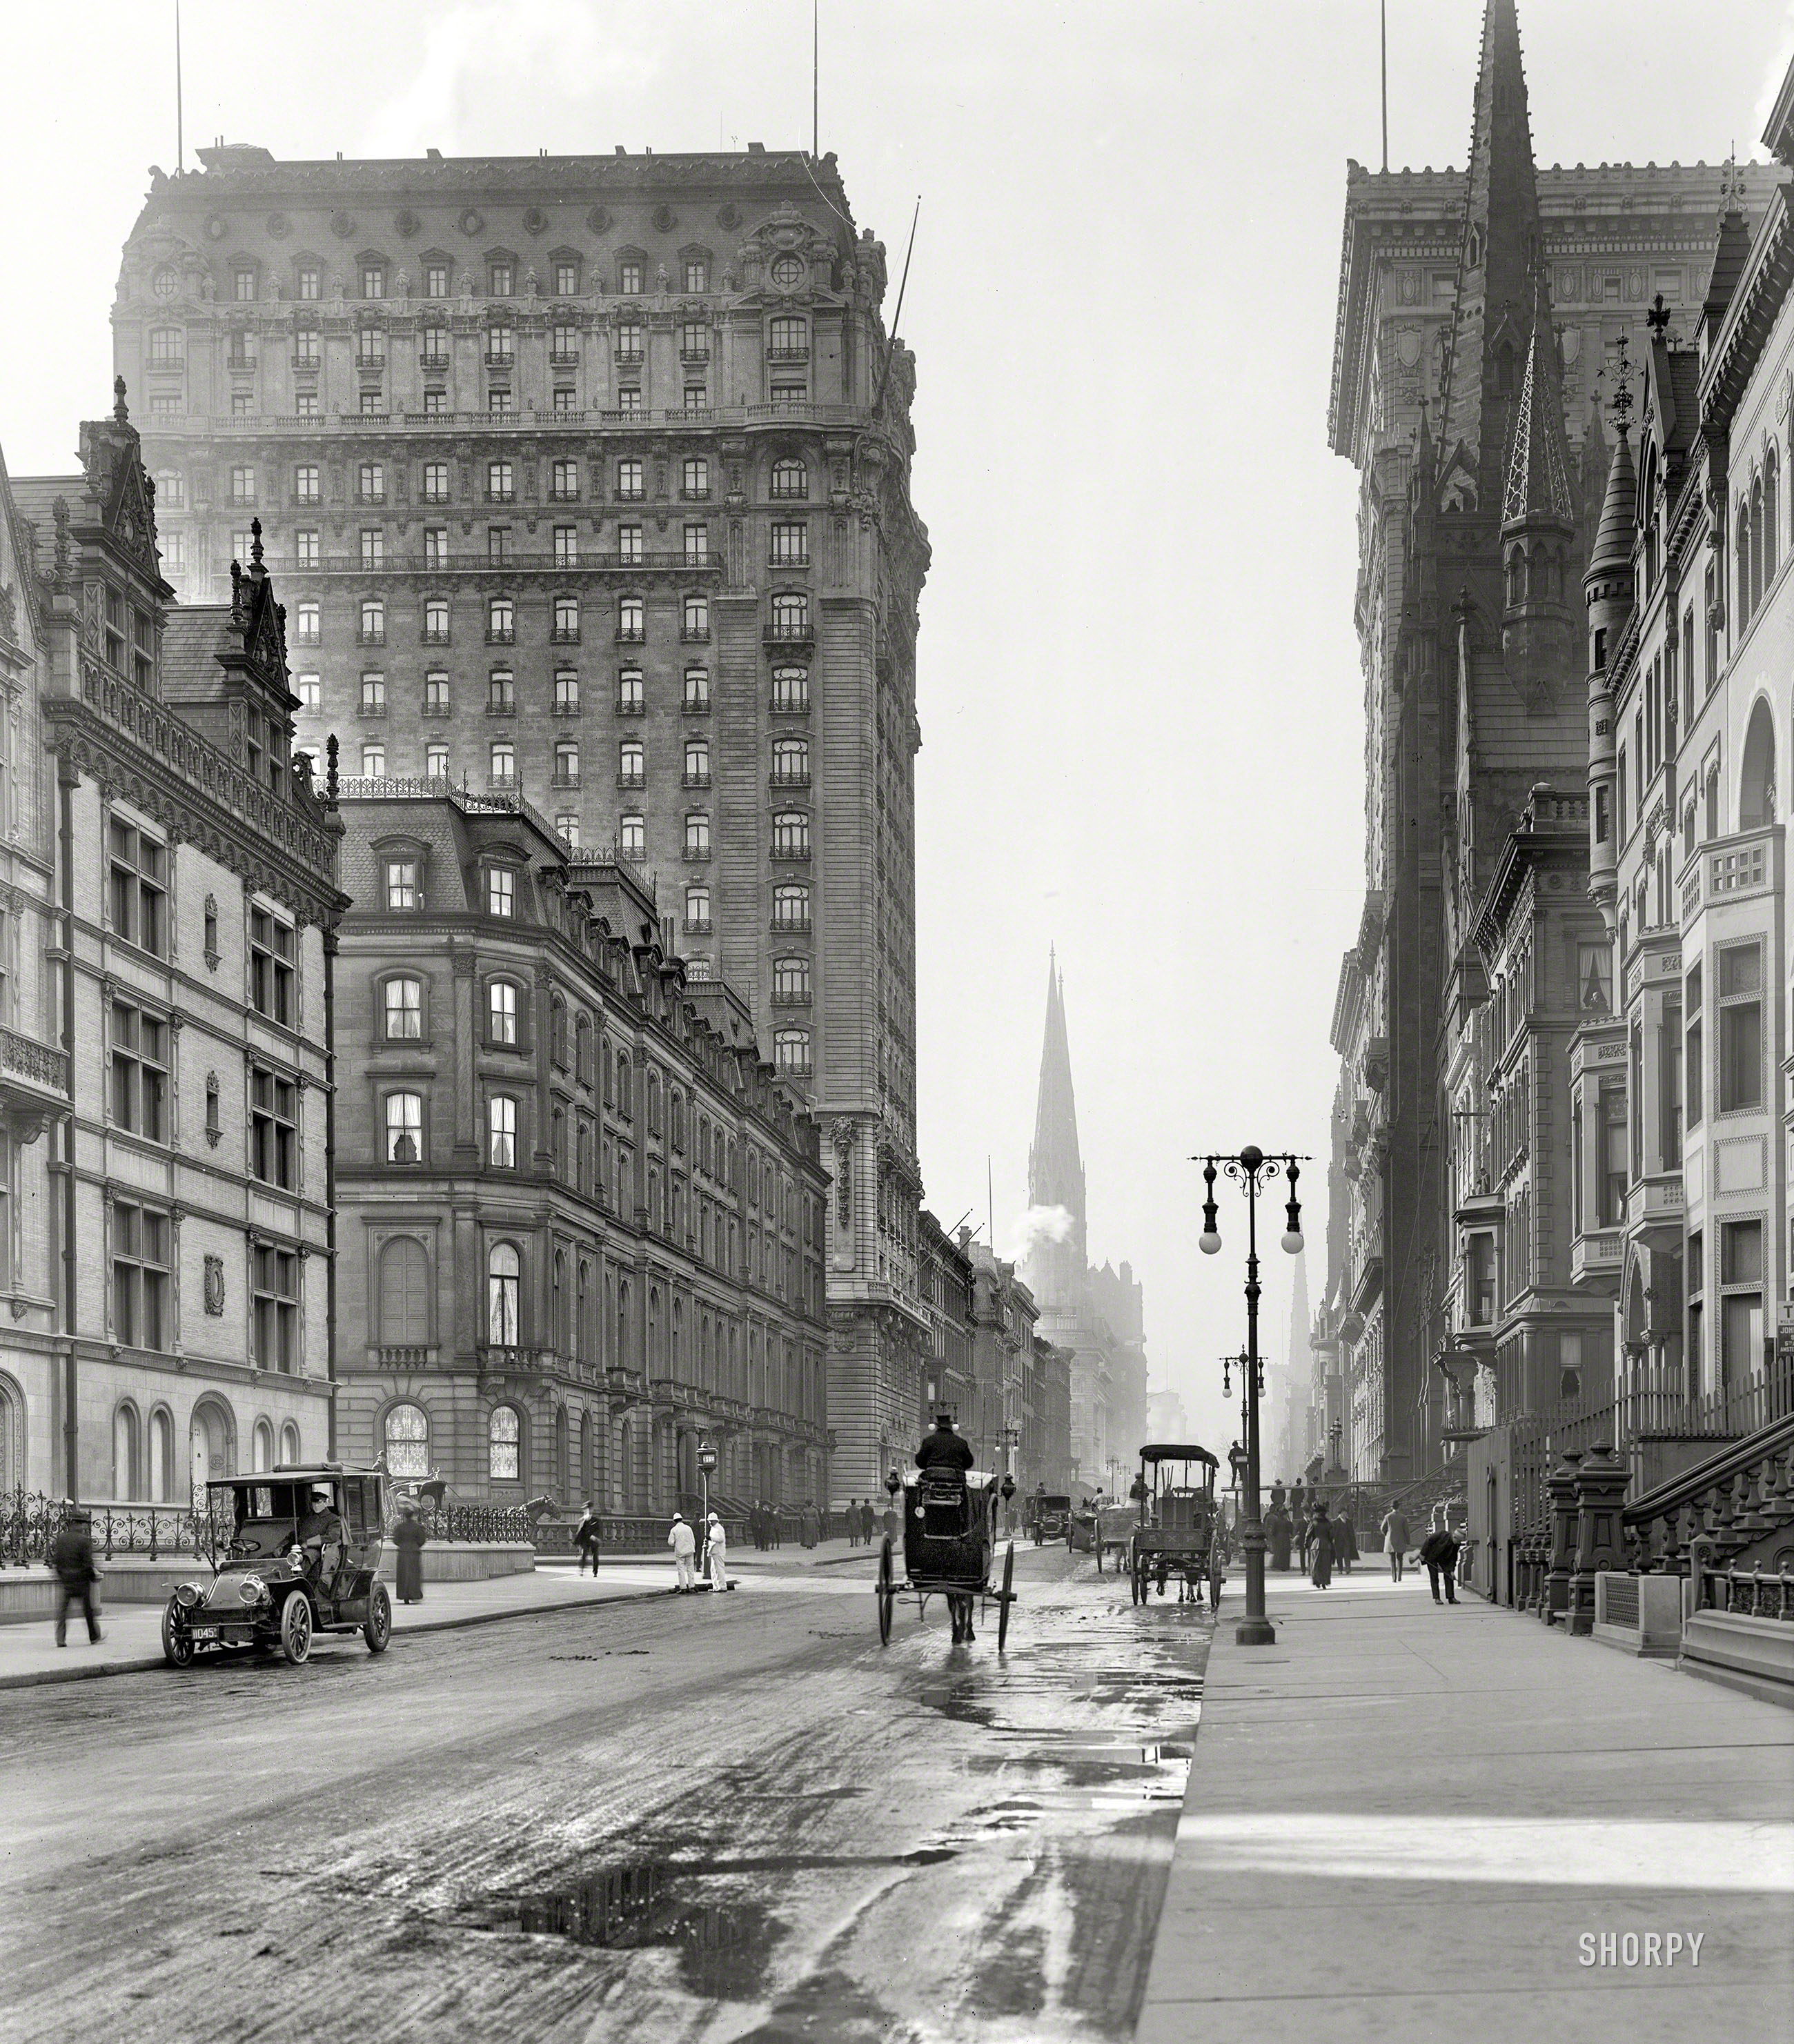 New York circa 1905. "St. Regis and Gotham hotels." Looking south along Fifth Avenue at East 56th Street, a streetscape glimpsed here from a different angle. On the right, the Gotham rising behind Fifth Avenue Presbyterian Church. 8x10 inch dry plate glass negative, Detroit Publishing Company. View full size.